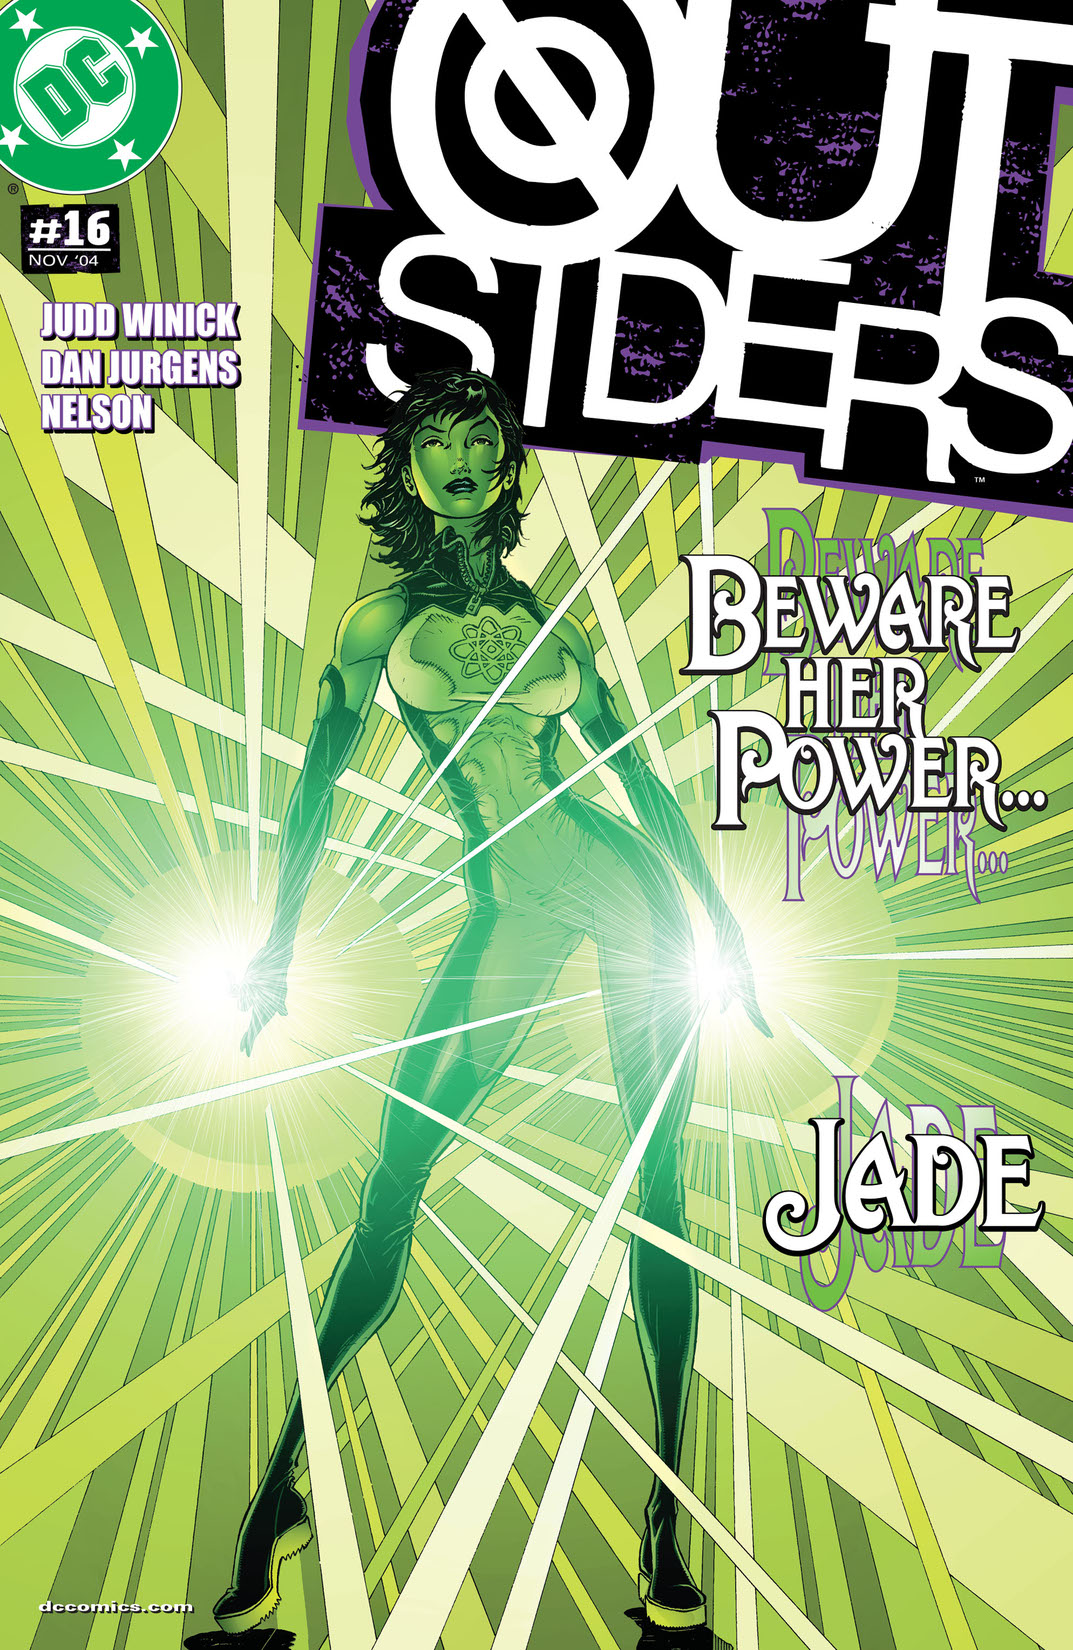 Outsiders (2003-) #16 preview images